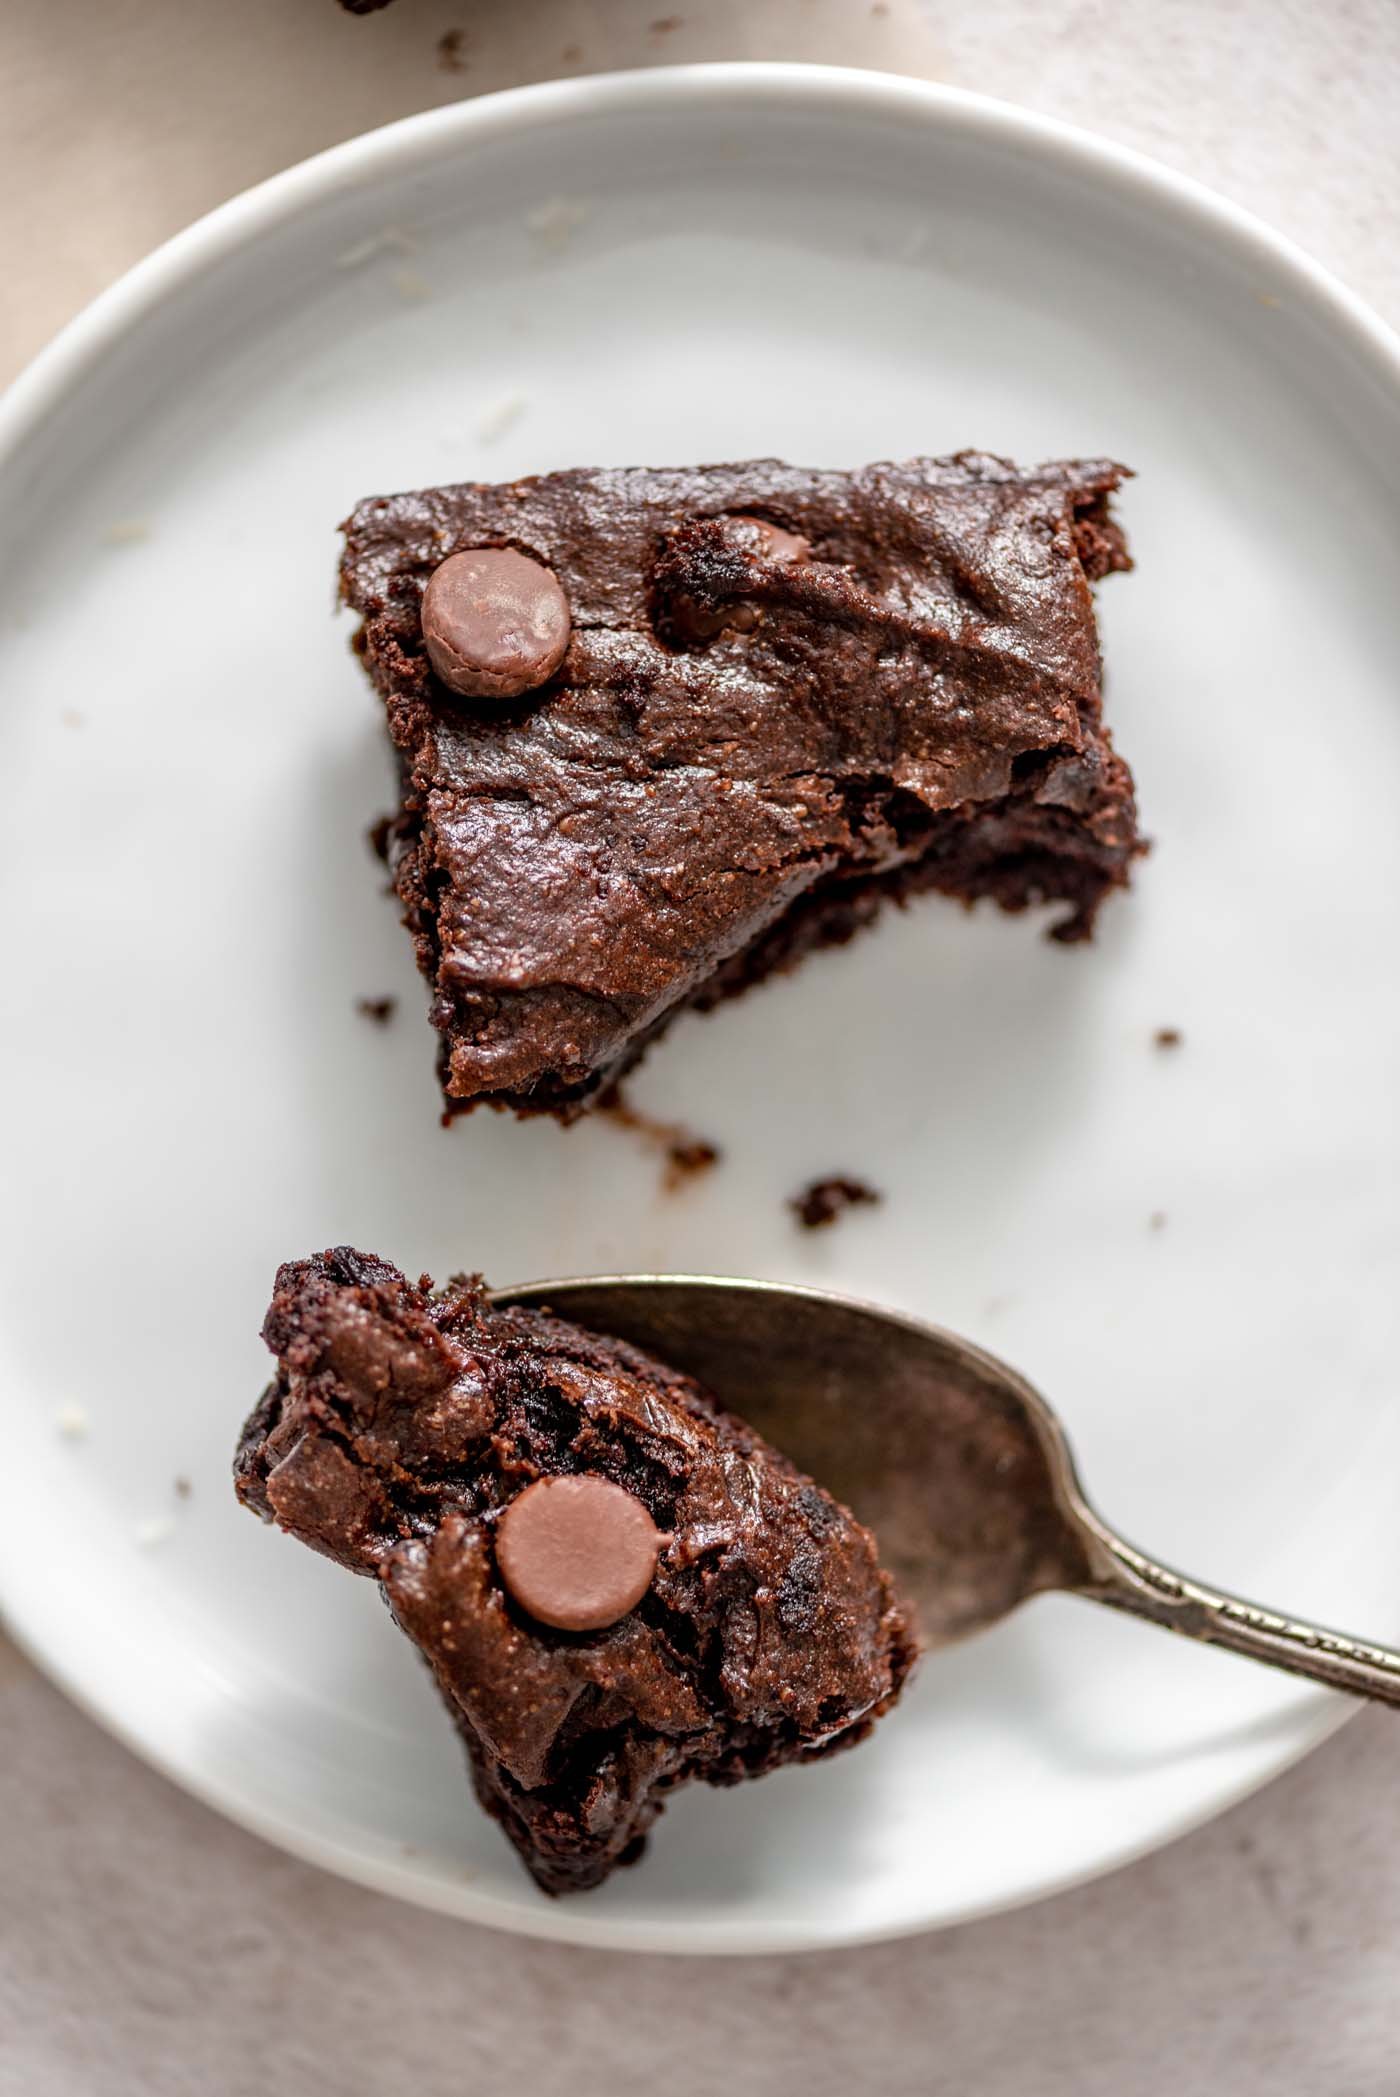 A brownie split in two by a spoon on a small plate.